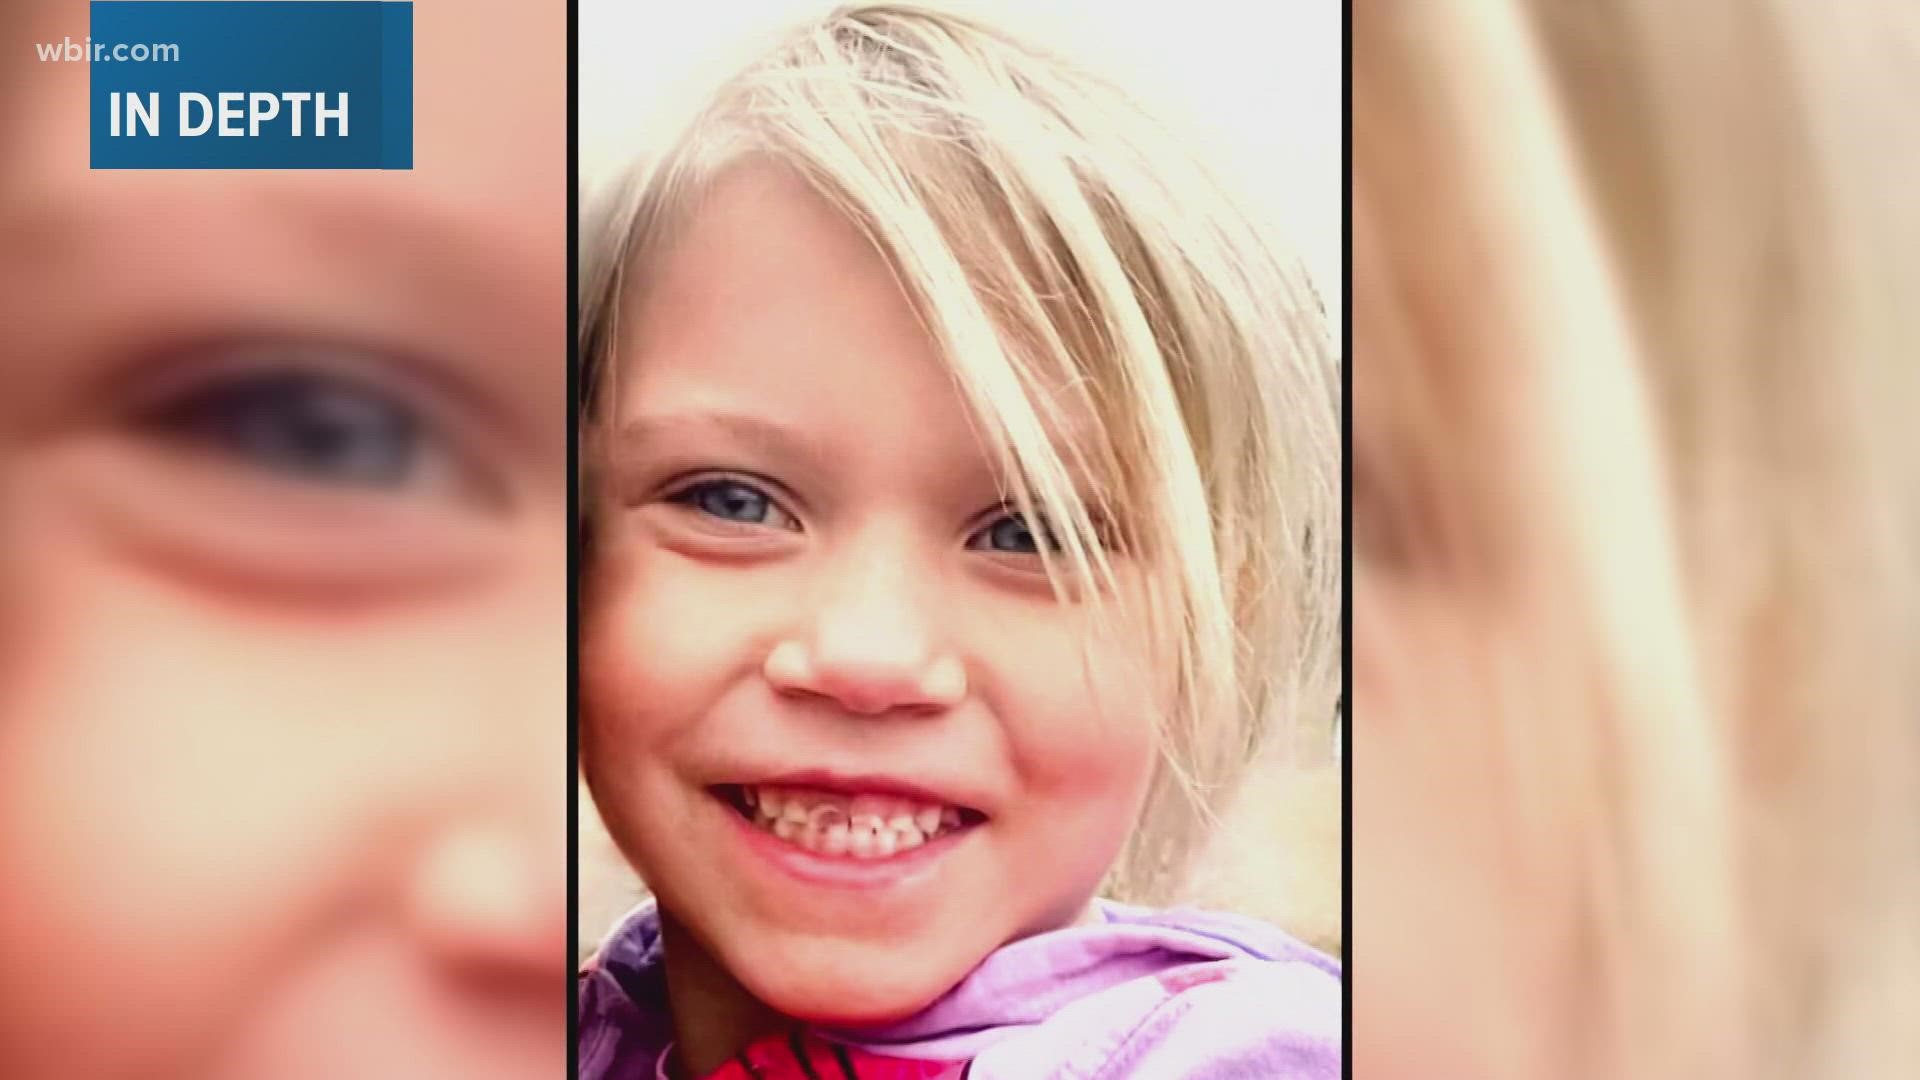 The 5-year-old was first reported missing from her home in June 2021.